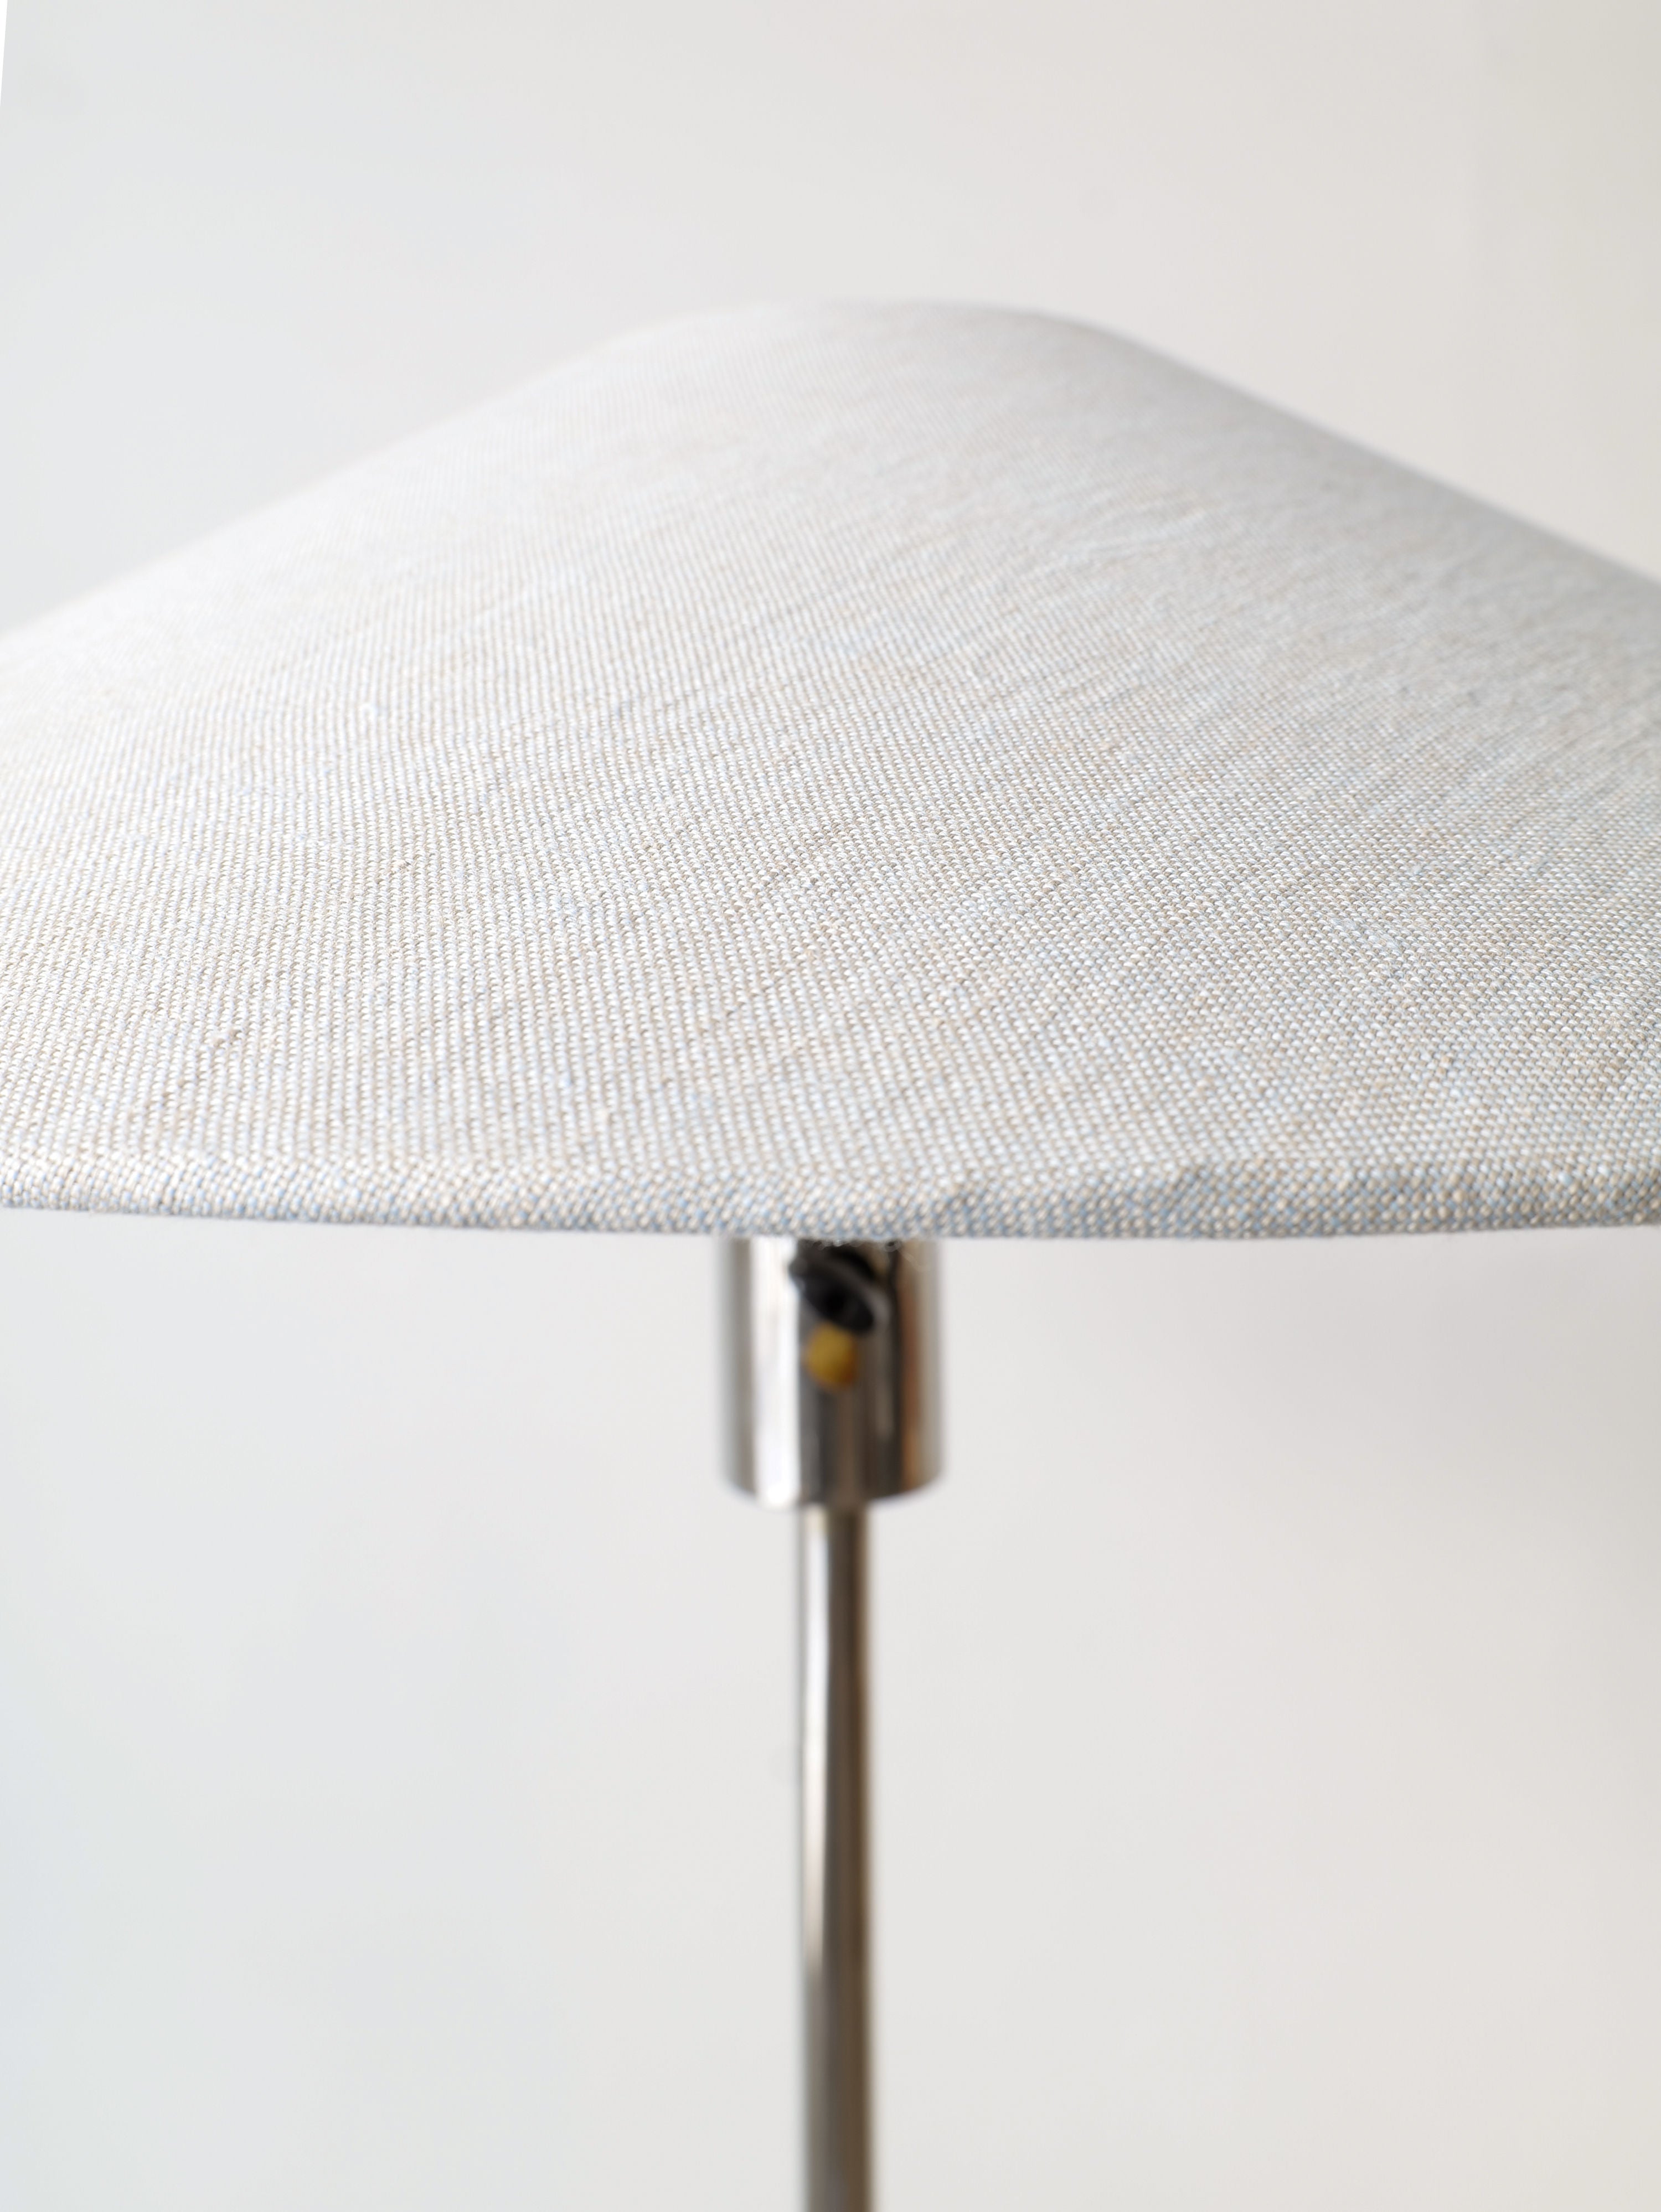 A close-up view of a Deco Floor Lamp Harald Notini 1940s by Collection apart, featuring a metallic stand and a large, conical, light grey fabric shade. The background is a plain, light-colored wall that subtly highlights the Swedish Modern design elements from Arvid Böhlmarks Lamp Factory.